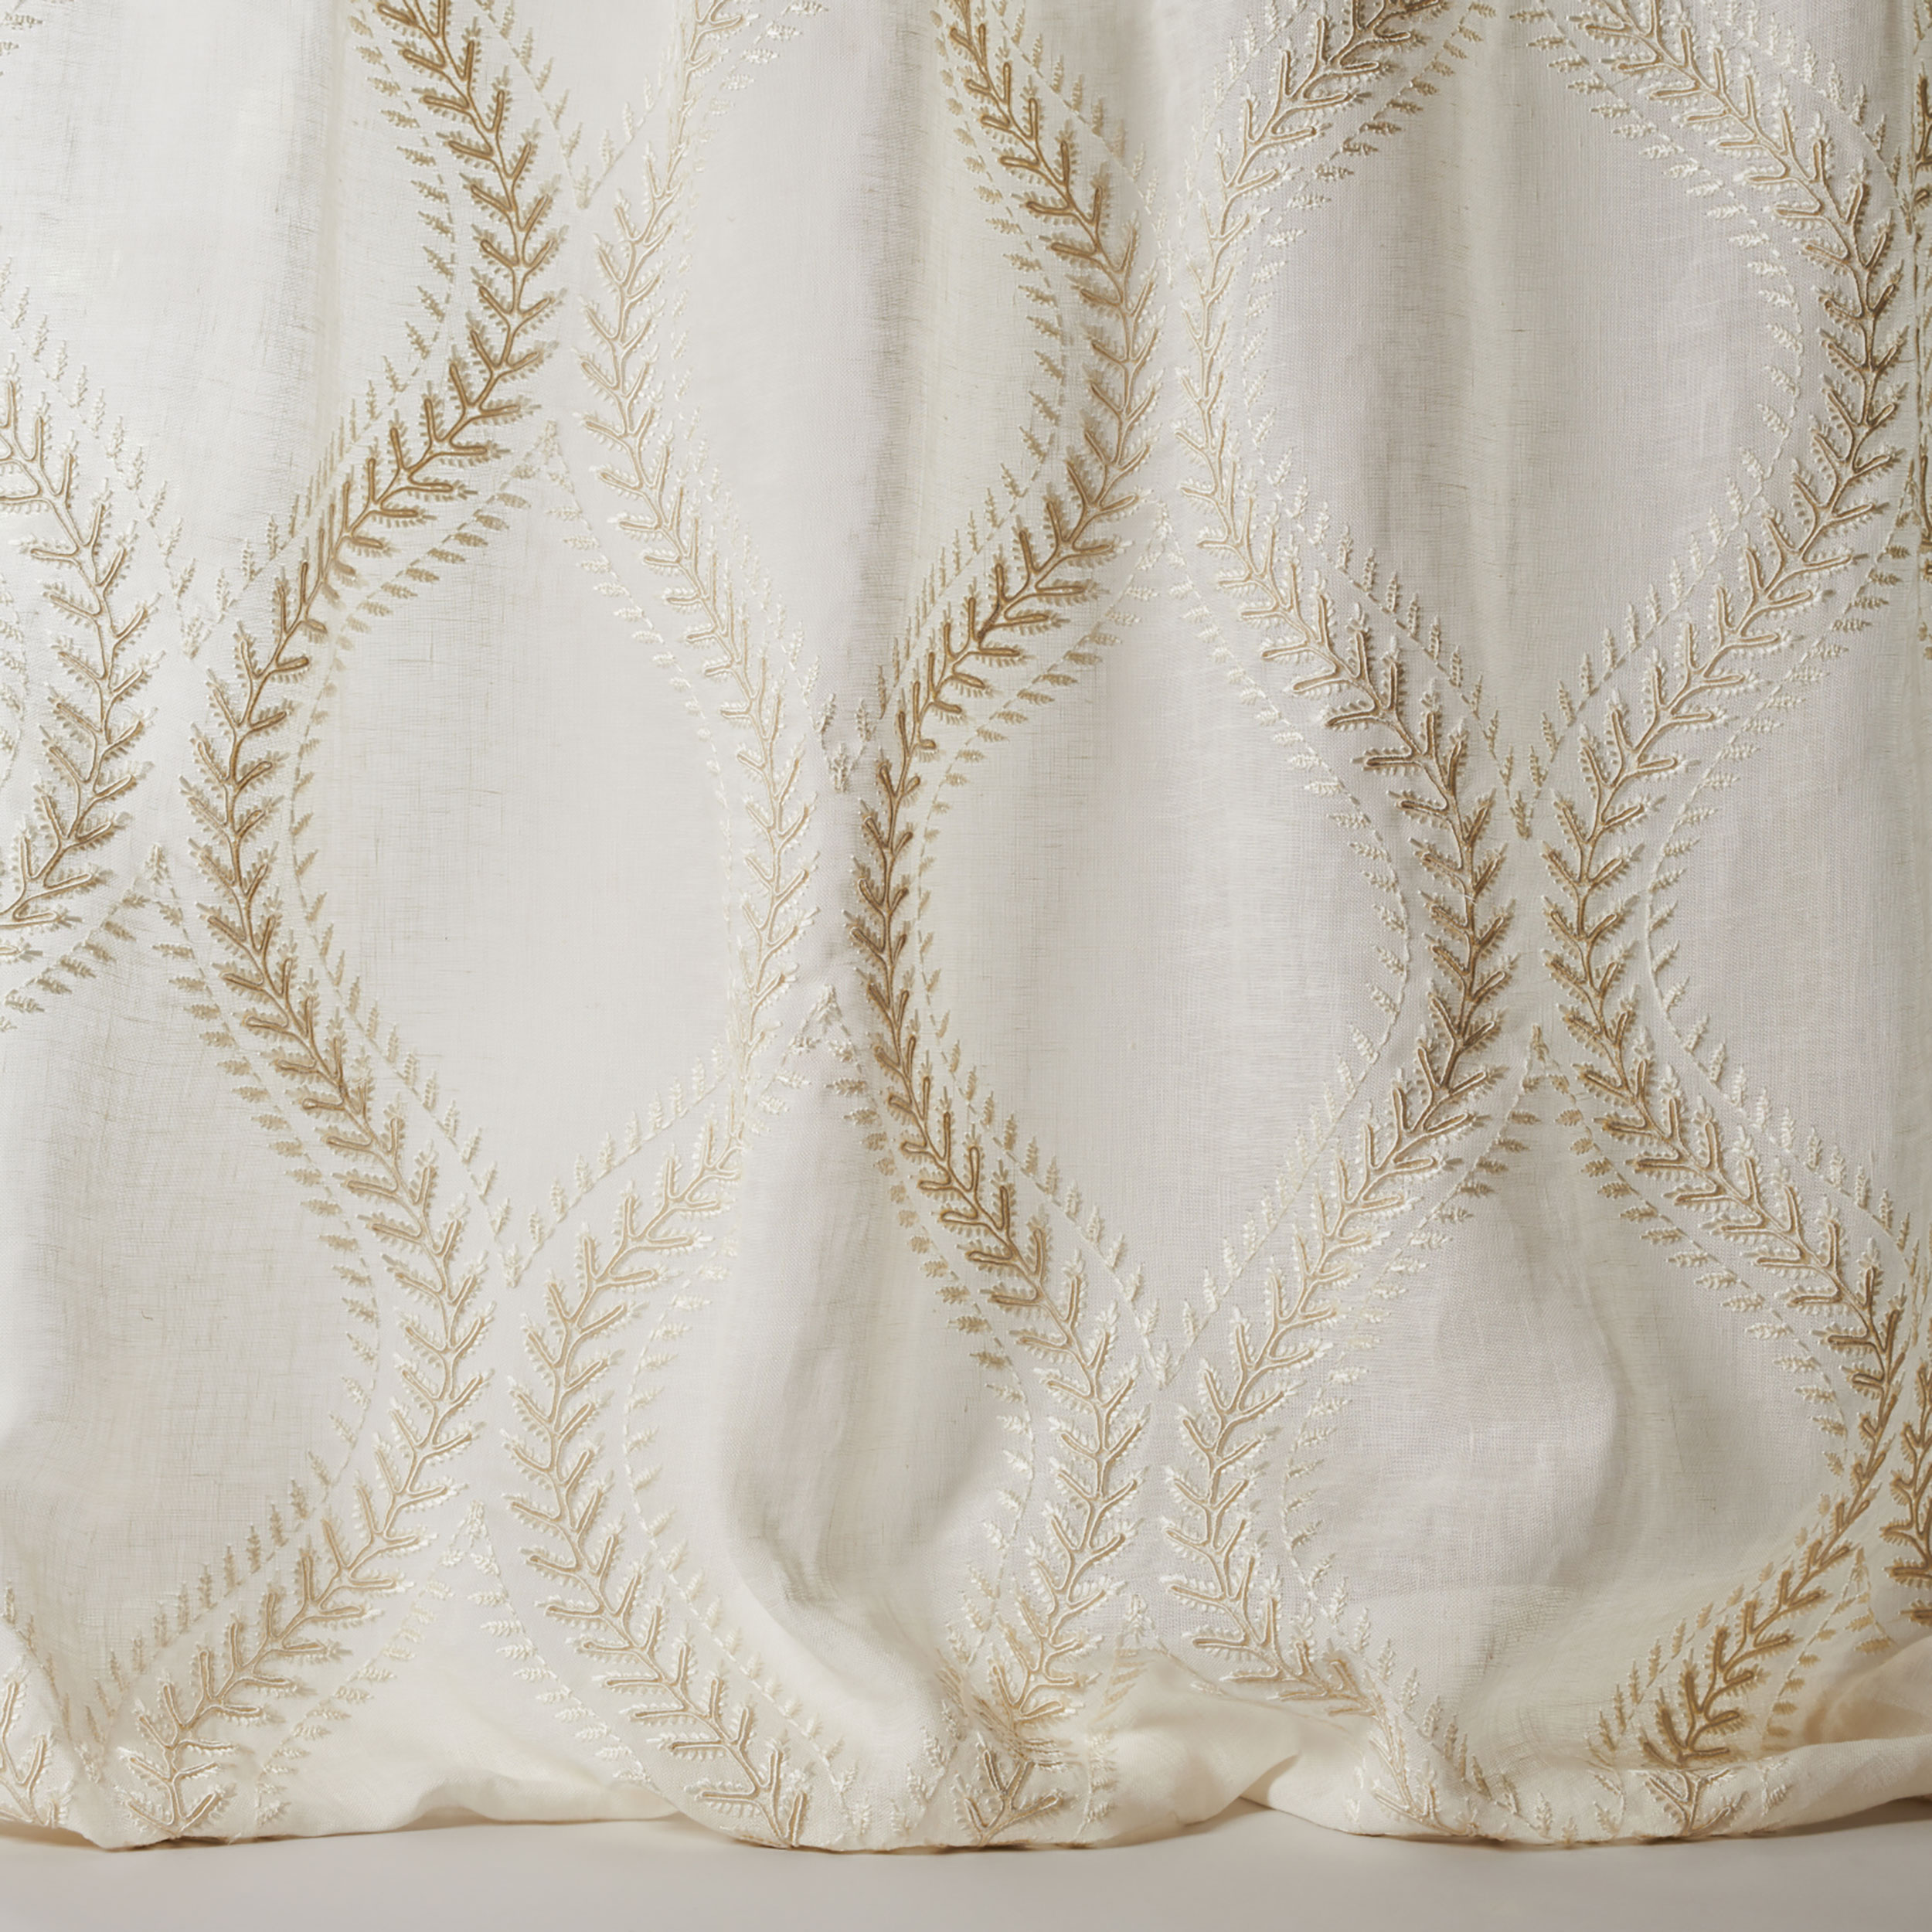 Oberon Fabric in Ivory by Colefax and Fowler